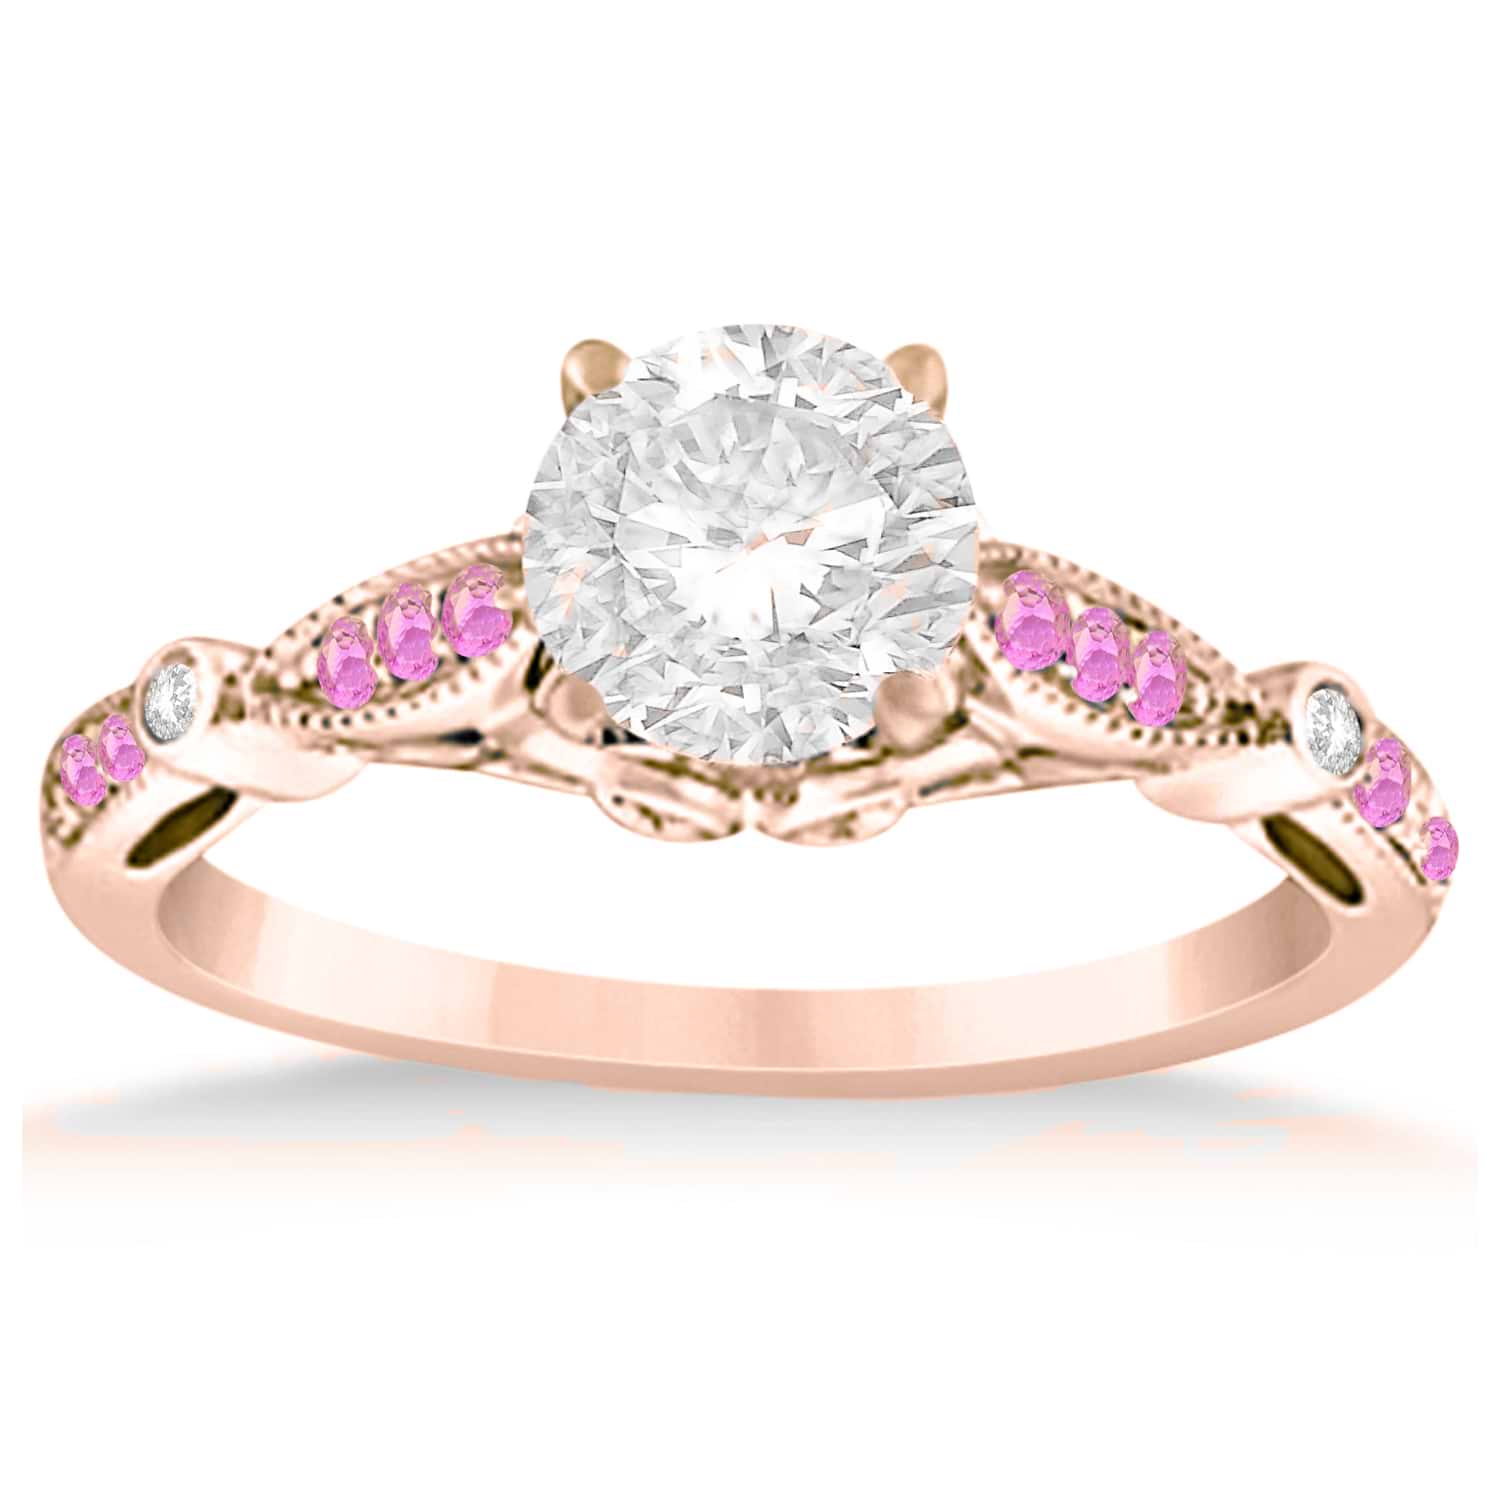 Marquise & Dot Pink Sapphire Vintage Engagement Ring 14k Rose Gold 0.13ct